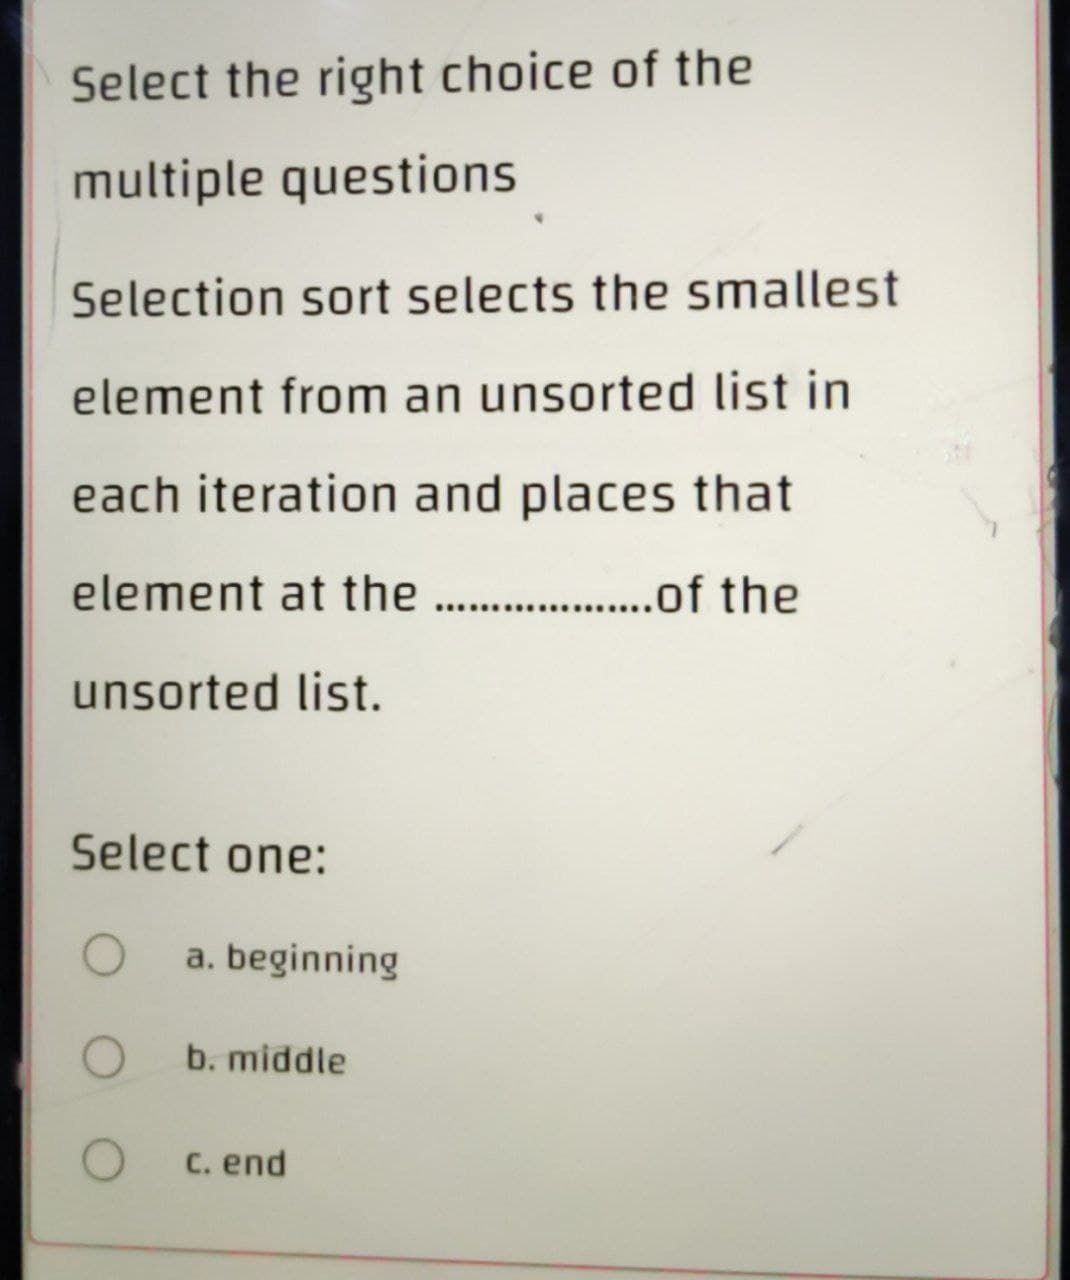 Select the right choice of the
multiple questions
Selection sort selects the smallest
element from an unsorted list in
each iteration and places that
element at the ....................of the
unsorted list.
Select one:
O
O
O
a. beginning
b. middle
c. end